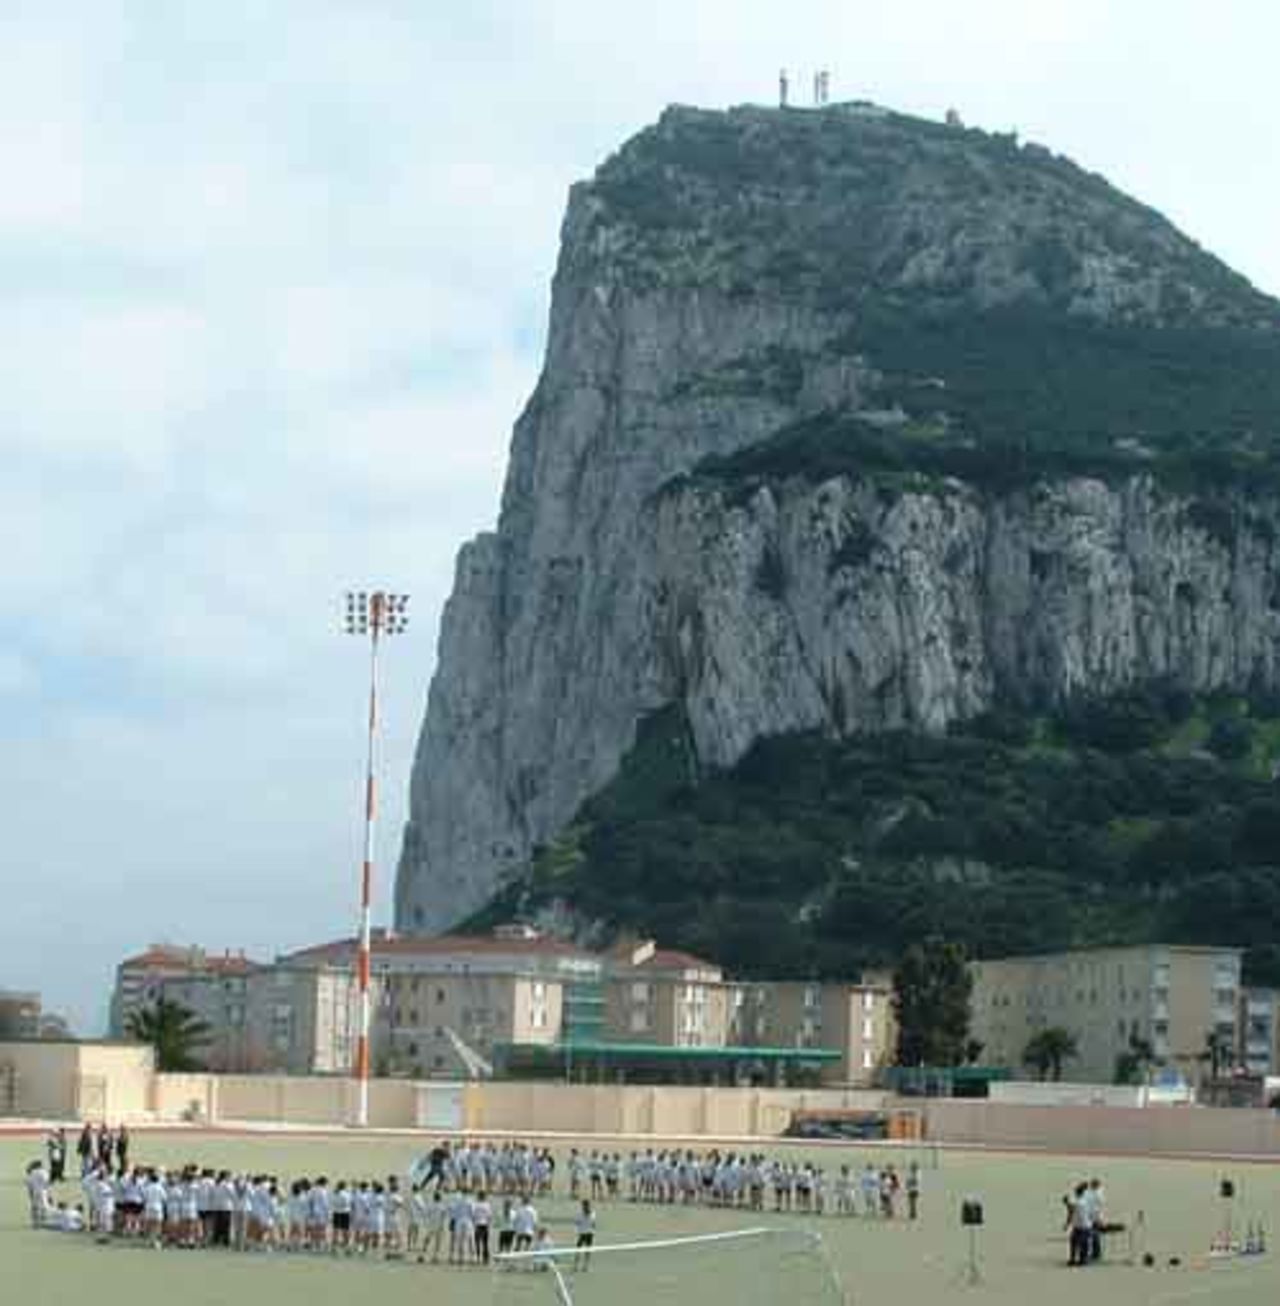 The 'Imagination' roadshow kicks off at the Sacred Heart Middle School under the watchful gaze of the Rock of Gibraltar.